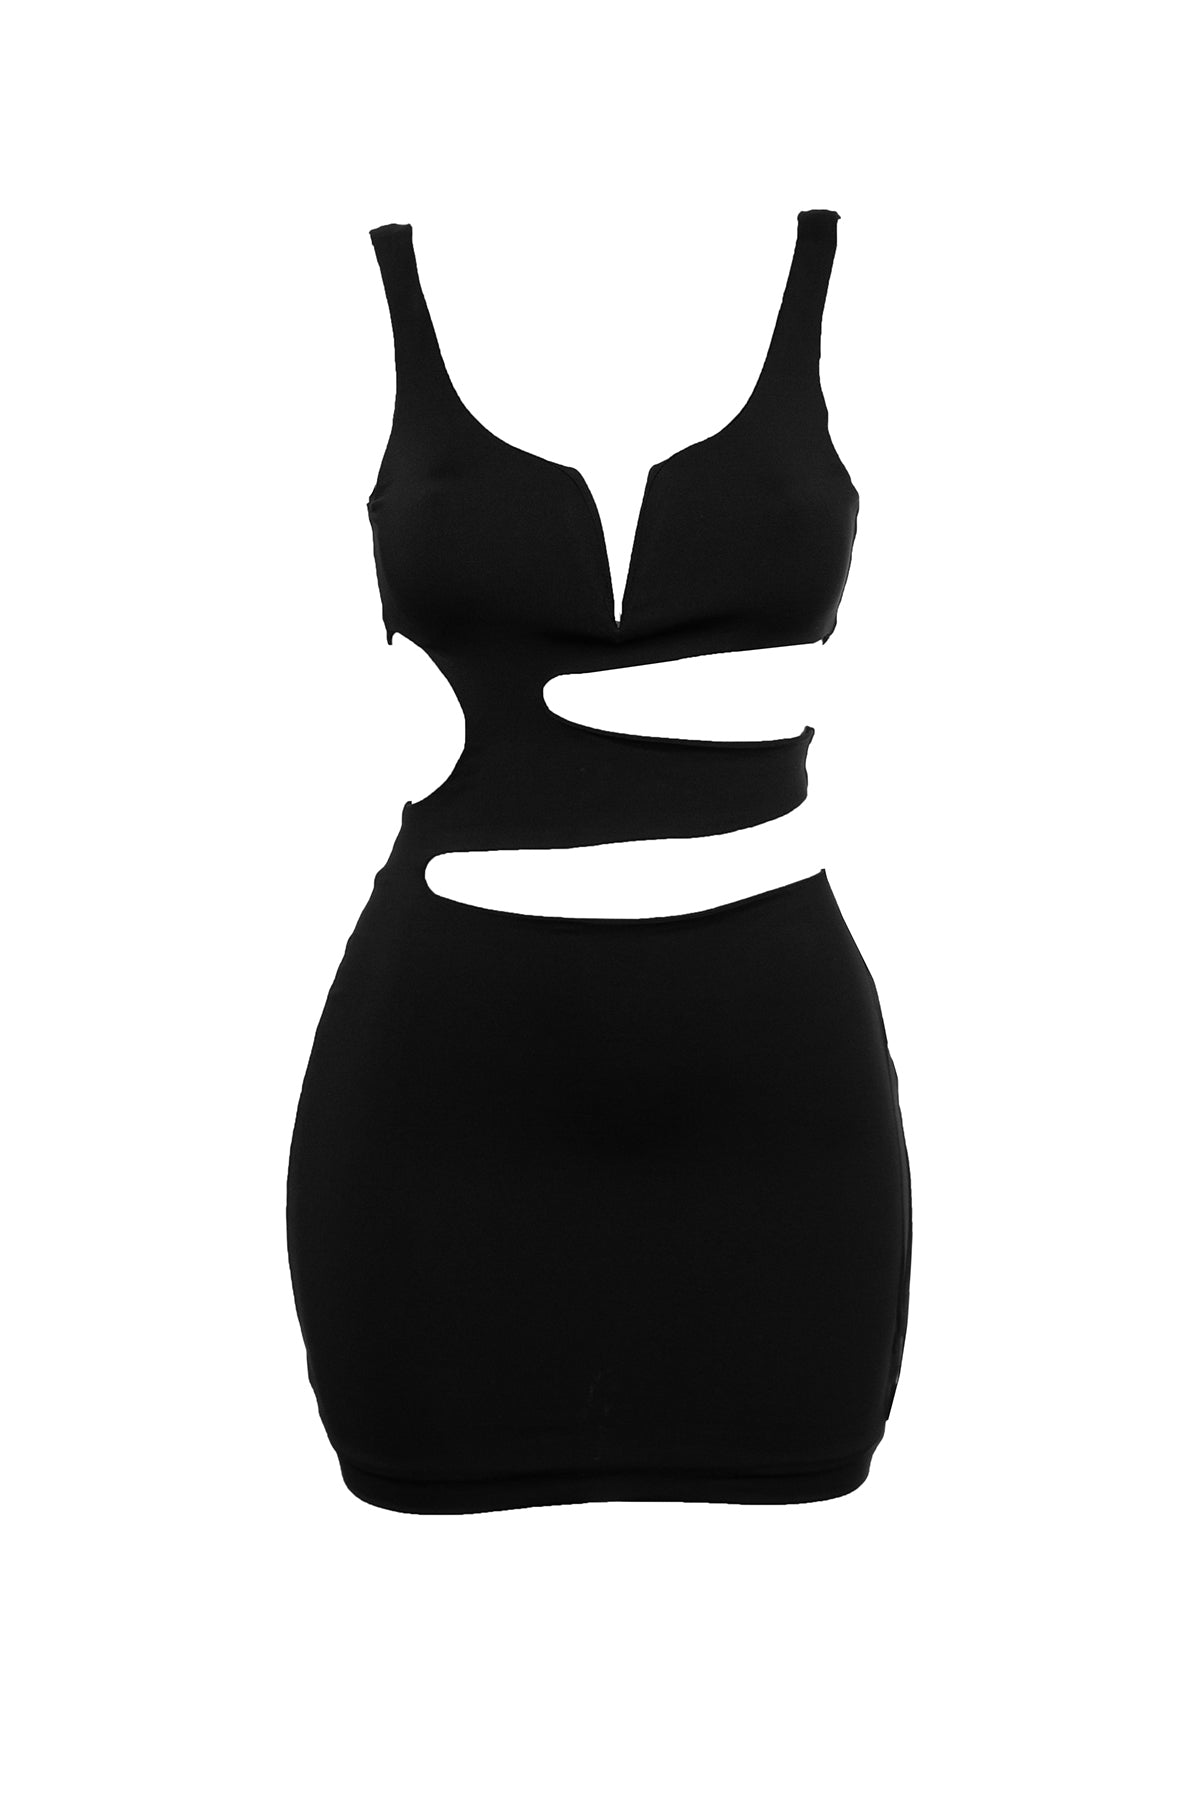 Close-up view of the side cutout detail on the Black Bodycon Mini Dress, emphasizing its stylish and alluring design.